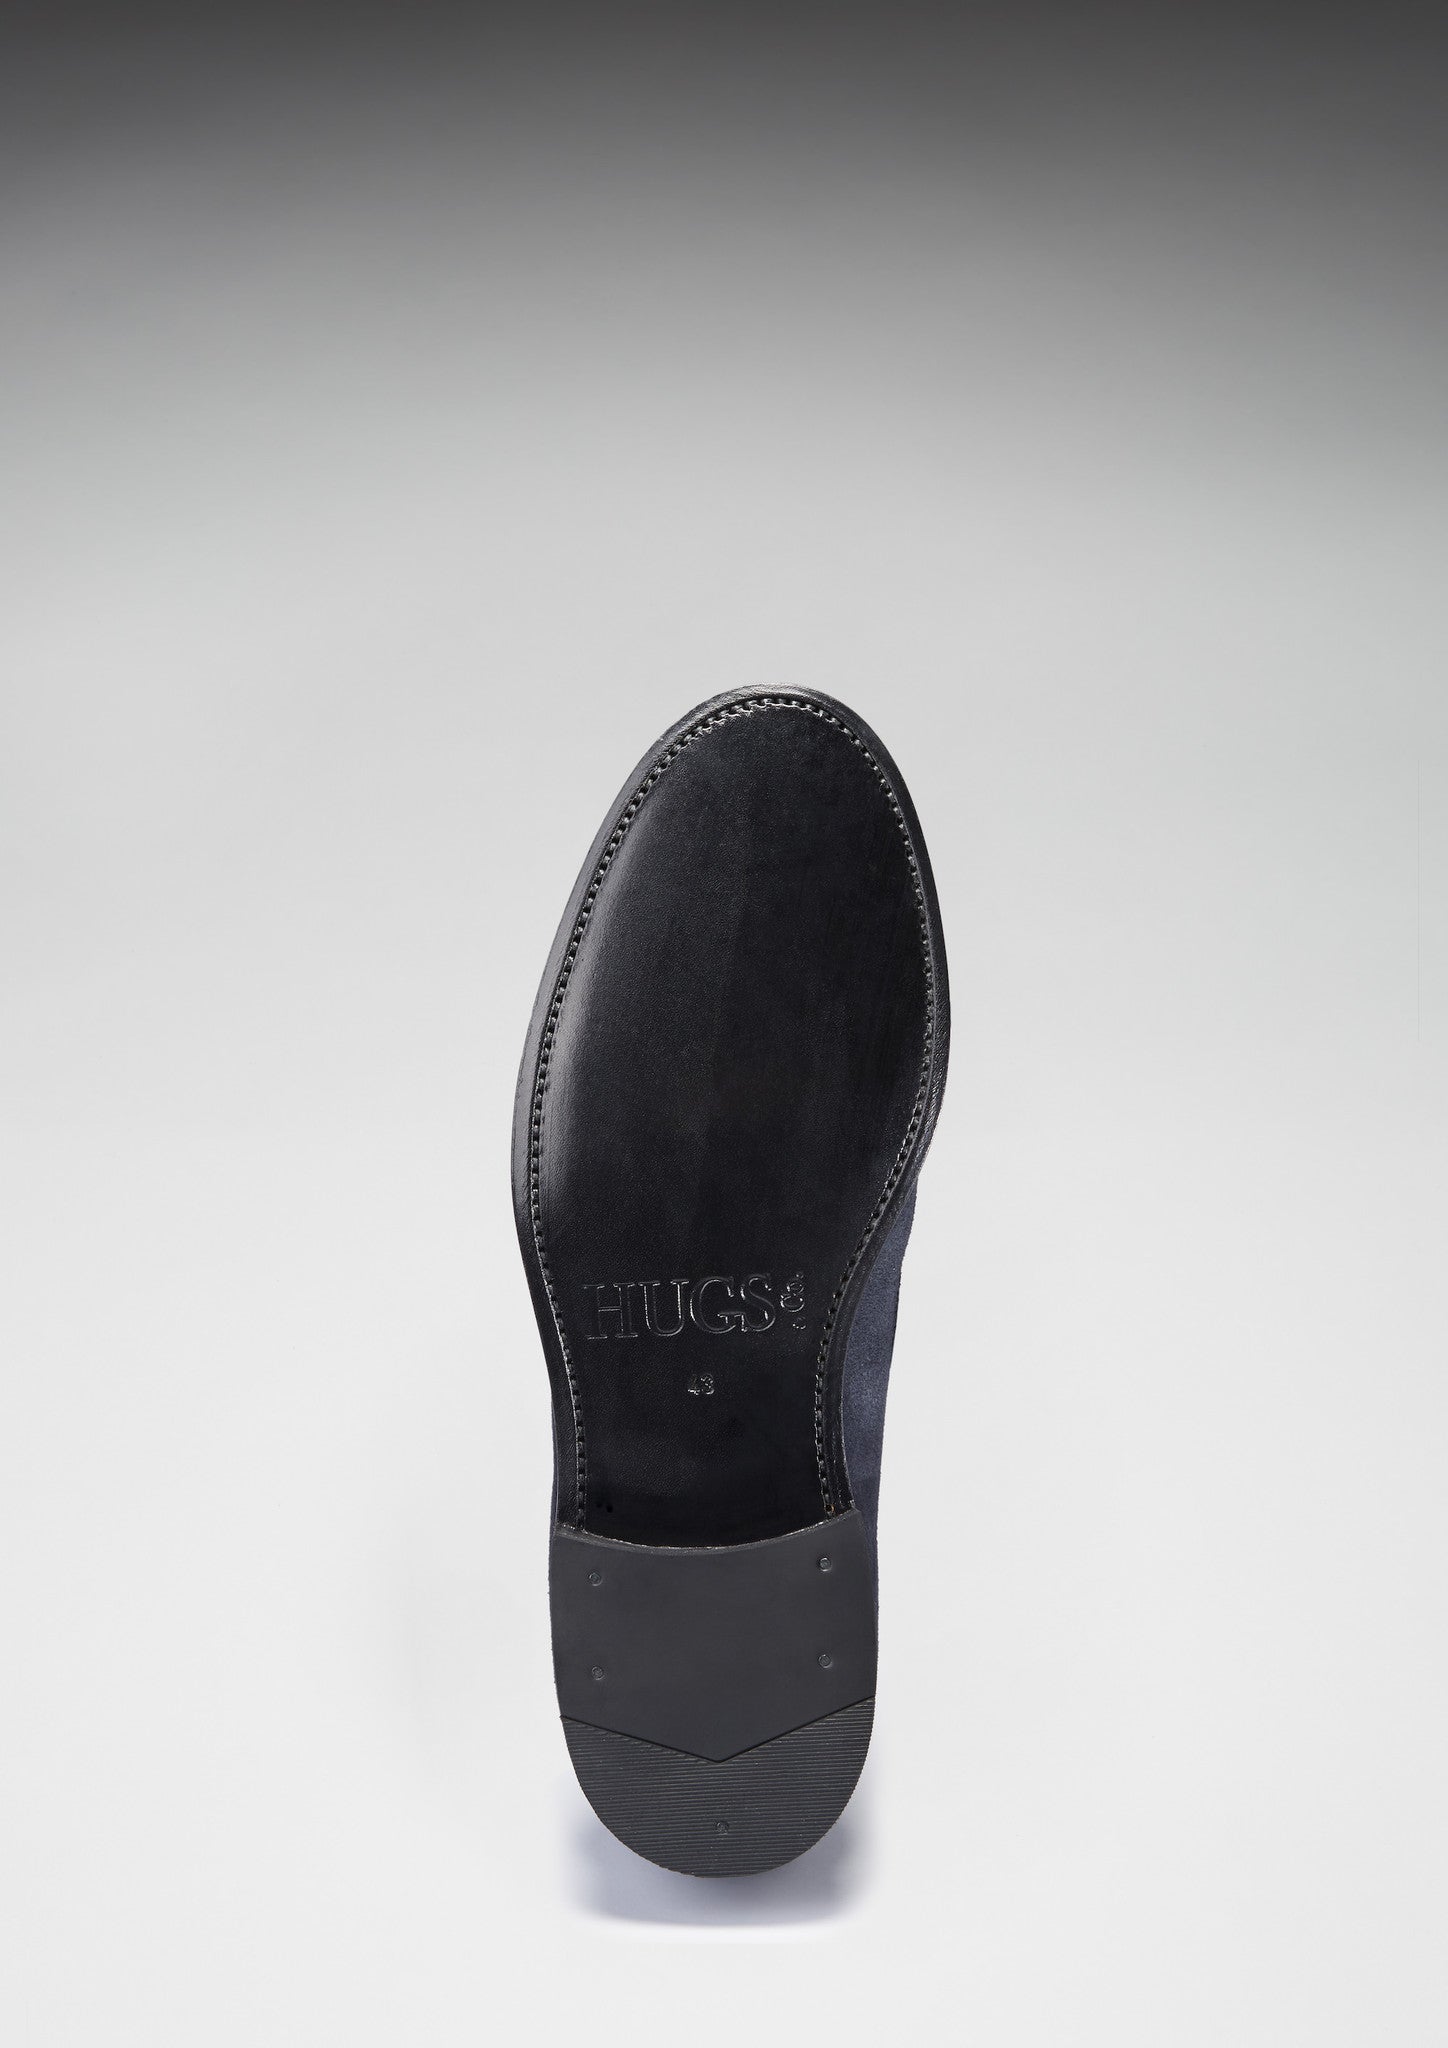 Navy Blue Suede Loafers, Welted Leather Sole